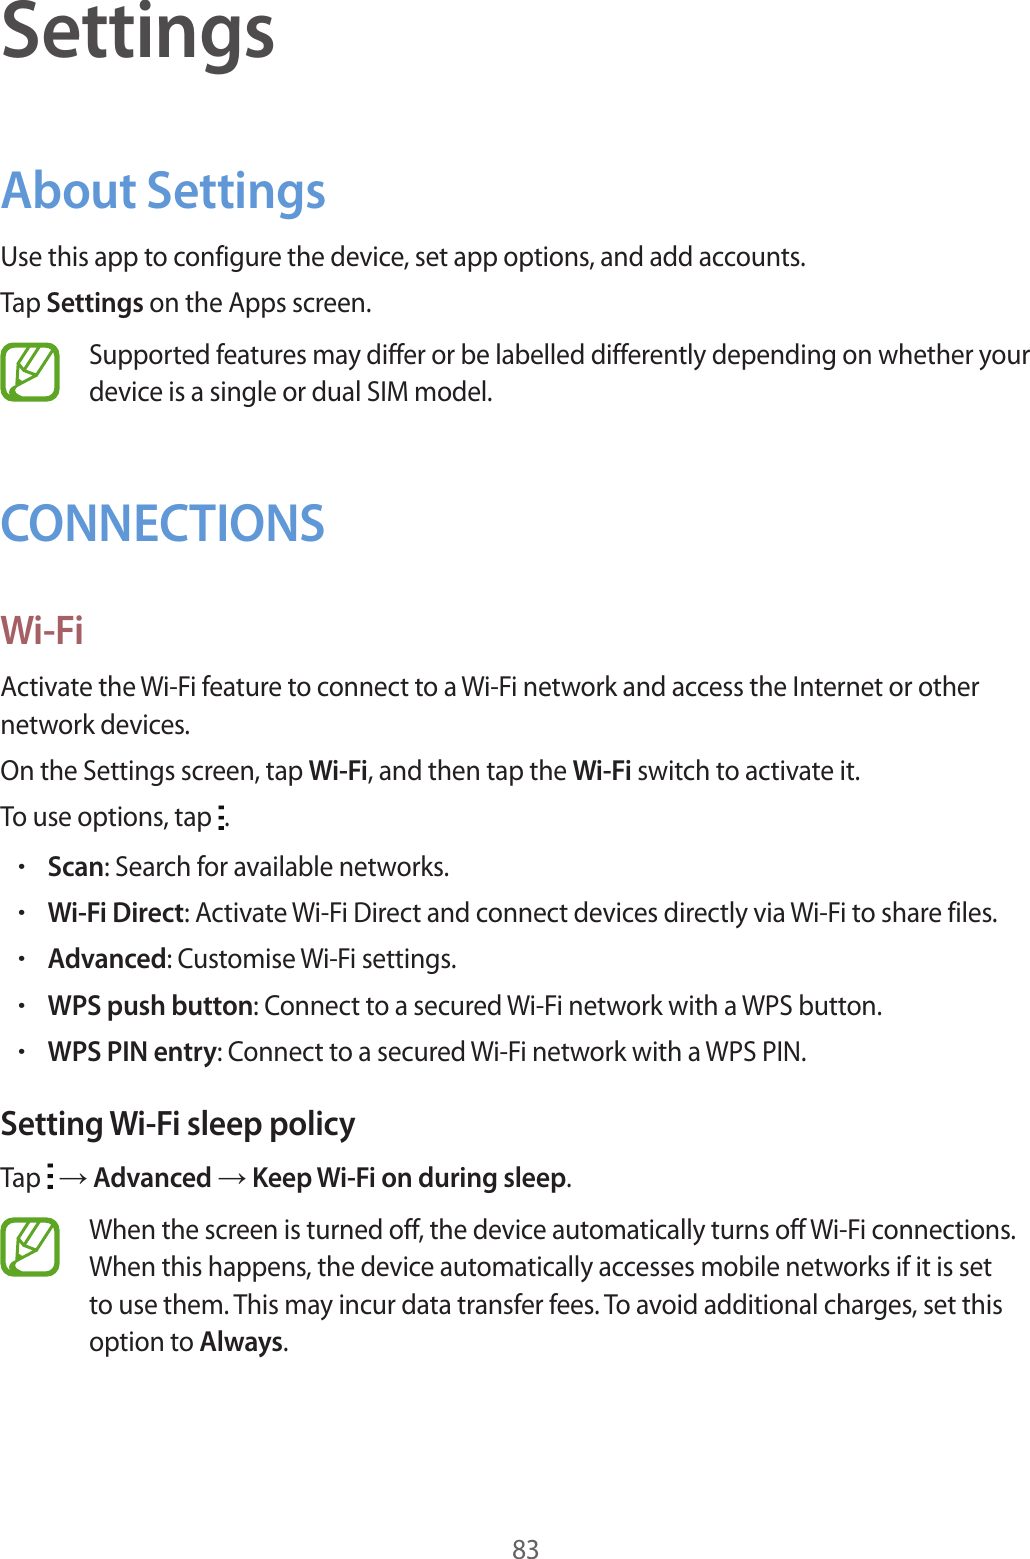 83SettingsAbout SettingsUse this app to configure the device, set app options, and add accounts.Tap Settings on the Apps screen.Supported features may differ or be labelled differently depending on whether your device is a single or dual SIM model.CONNECTIONSWi-FiActivate the Wi-Fi feature to connect to a Wi-Fi network and access the Internet or other network devices.On the Settings screen, tap Wi-Fi, and then tap the Wi-Fi switch to activate it.To use options, tap  .•Scan: Search for available networks.•Wi-Fi Direct: Activate Wi-Fi Direct and connect devices directly via Wi-Fi to share files.•Advanced: Customise Wi-Fi settings.•WPS push button: Connect to a secured Wi-Fi network with a WPS button.•WPS PIN entry: Connect to a secured Wi-Fi network with a WPS PIN.Setting Wi-Fi sleep policyTap   → Advanced → Keep Wi-Fi on during sleep.When the screen is turned off, the device automatically turns off Wi-Fi connections. When this happens, the device automatically accesses mobile networks if it is set to use them. This may incur data transfer fees. To avoid additional charges, set this option to Always.